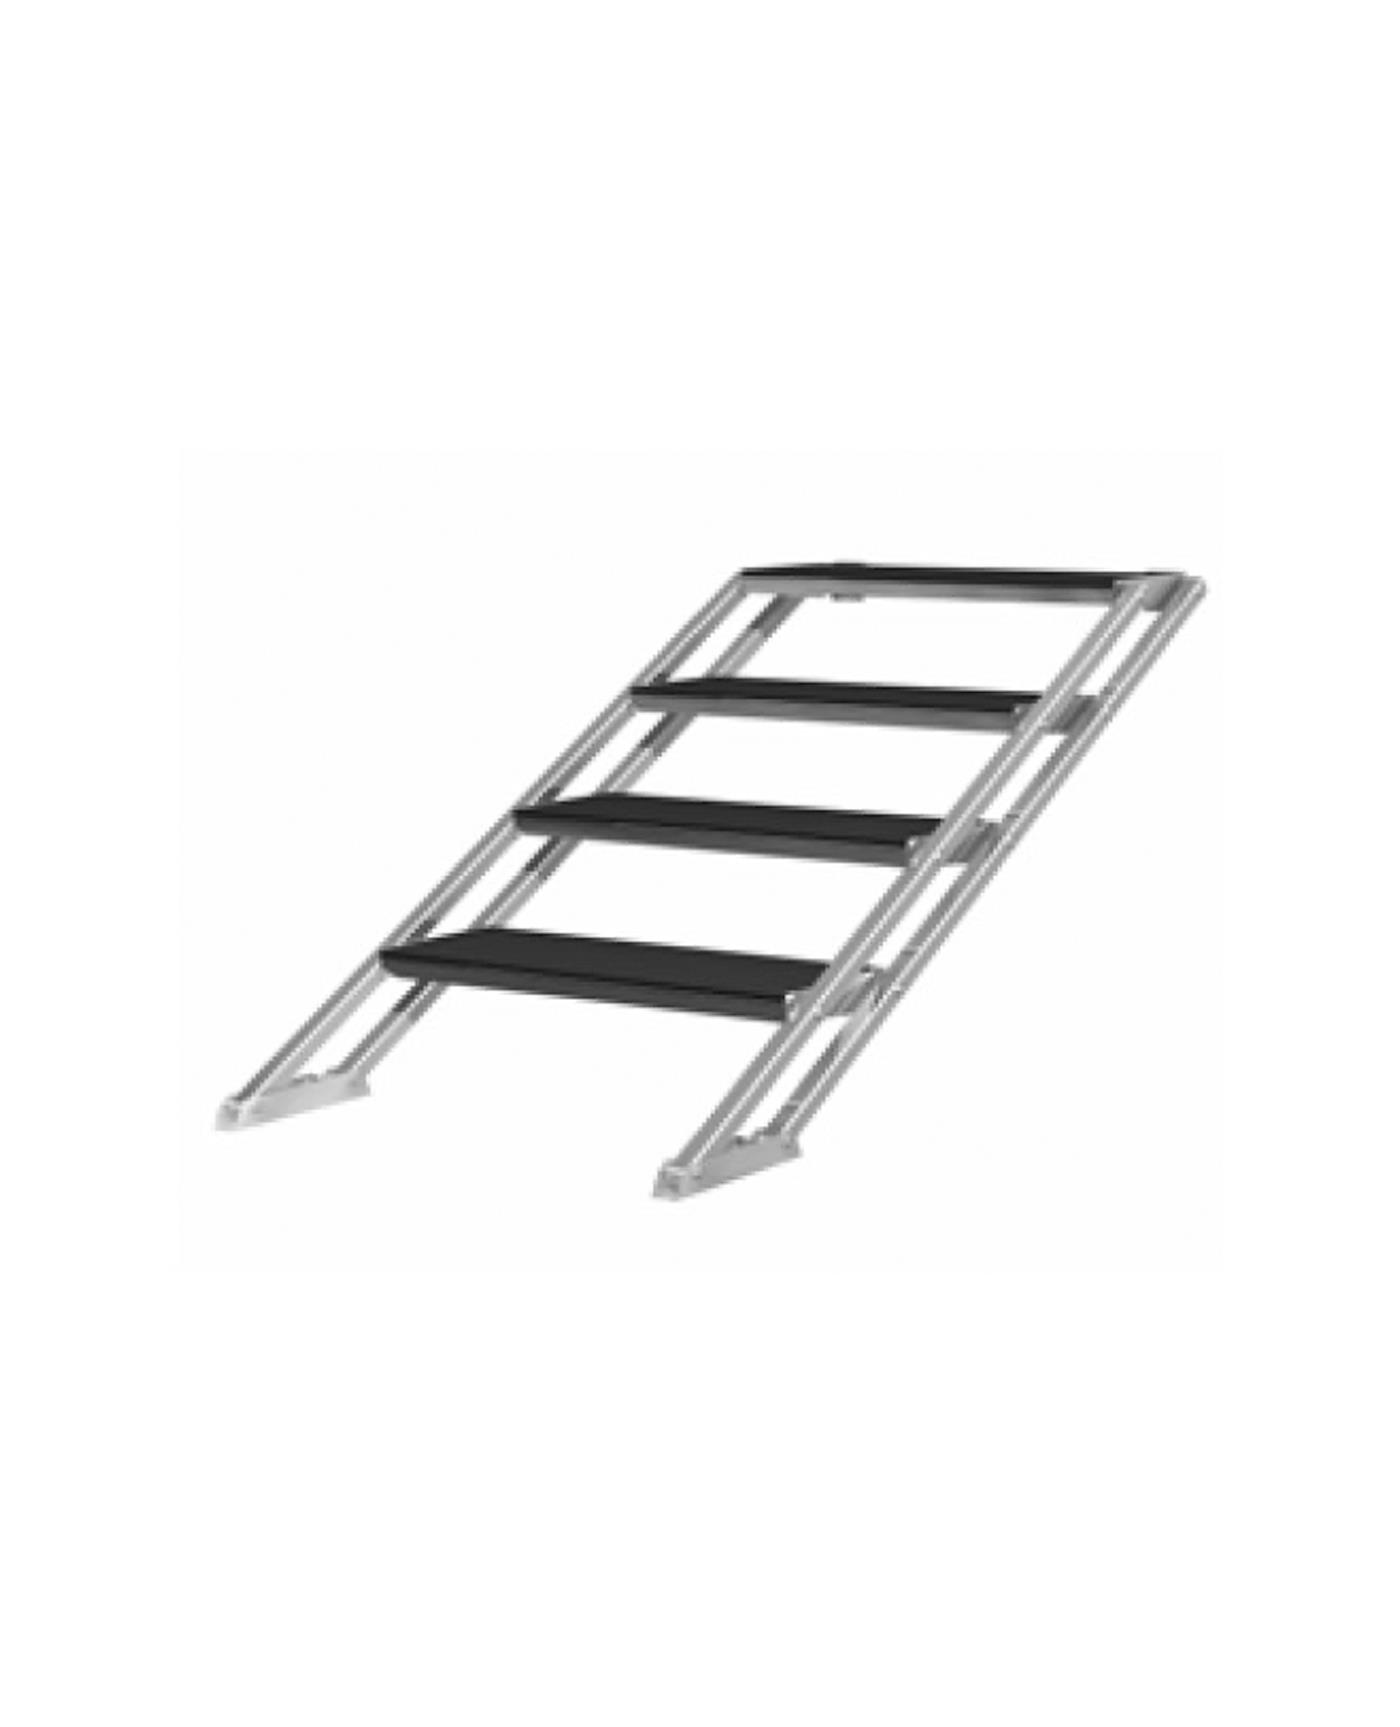 ADJUSTABLE STAIR FROM 0.6M TO 1M - 4 STEPS